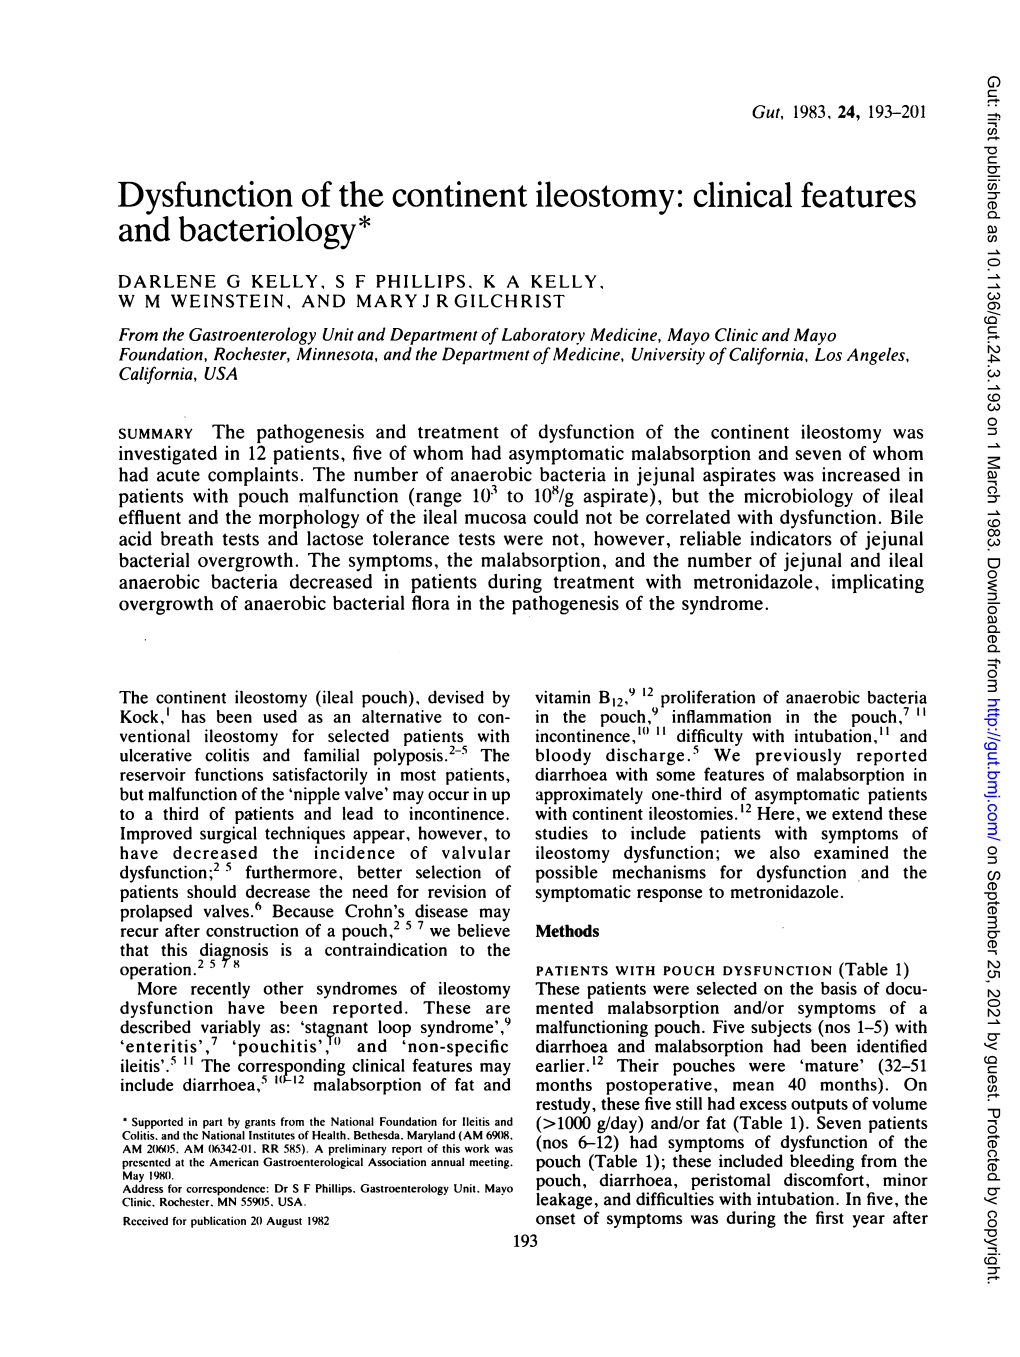 Dysfunction of the Continent Ileostomy: Clinical Features and Bacteriology*